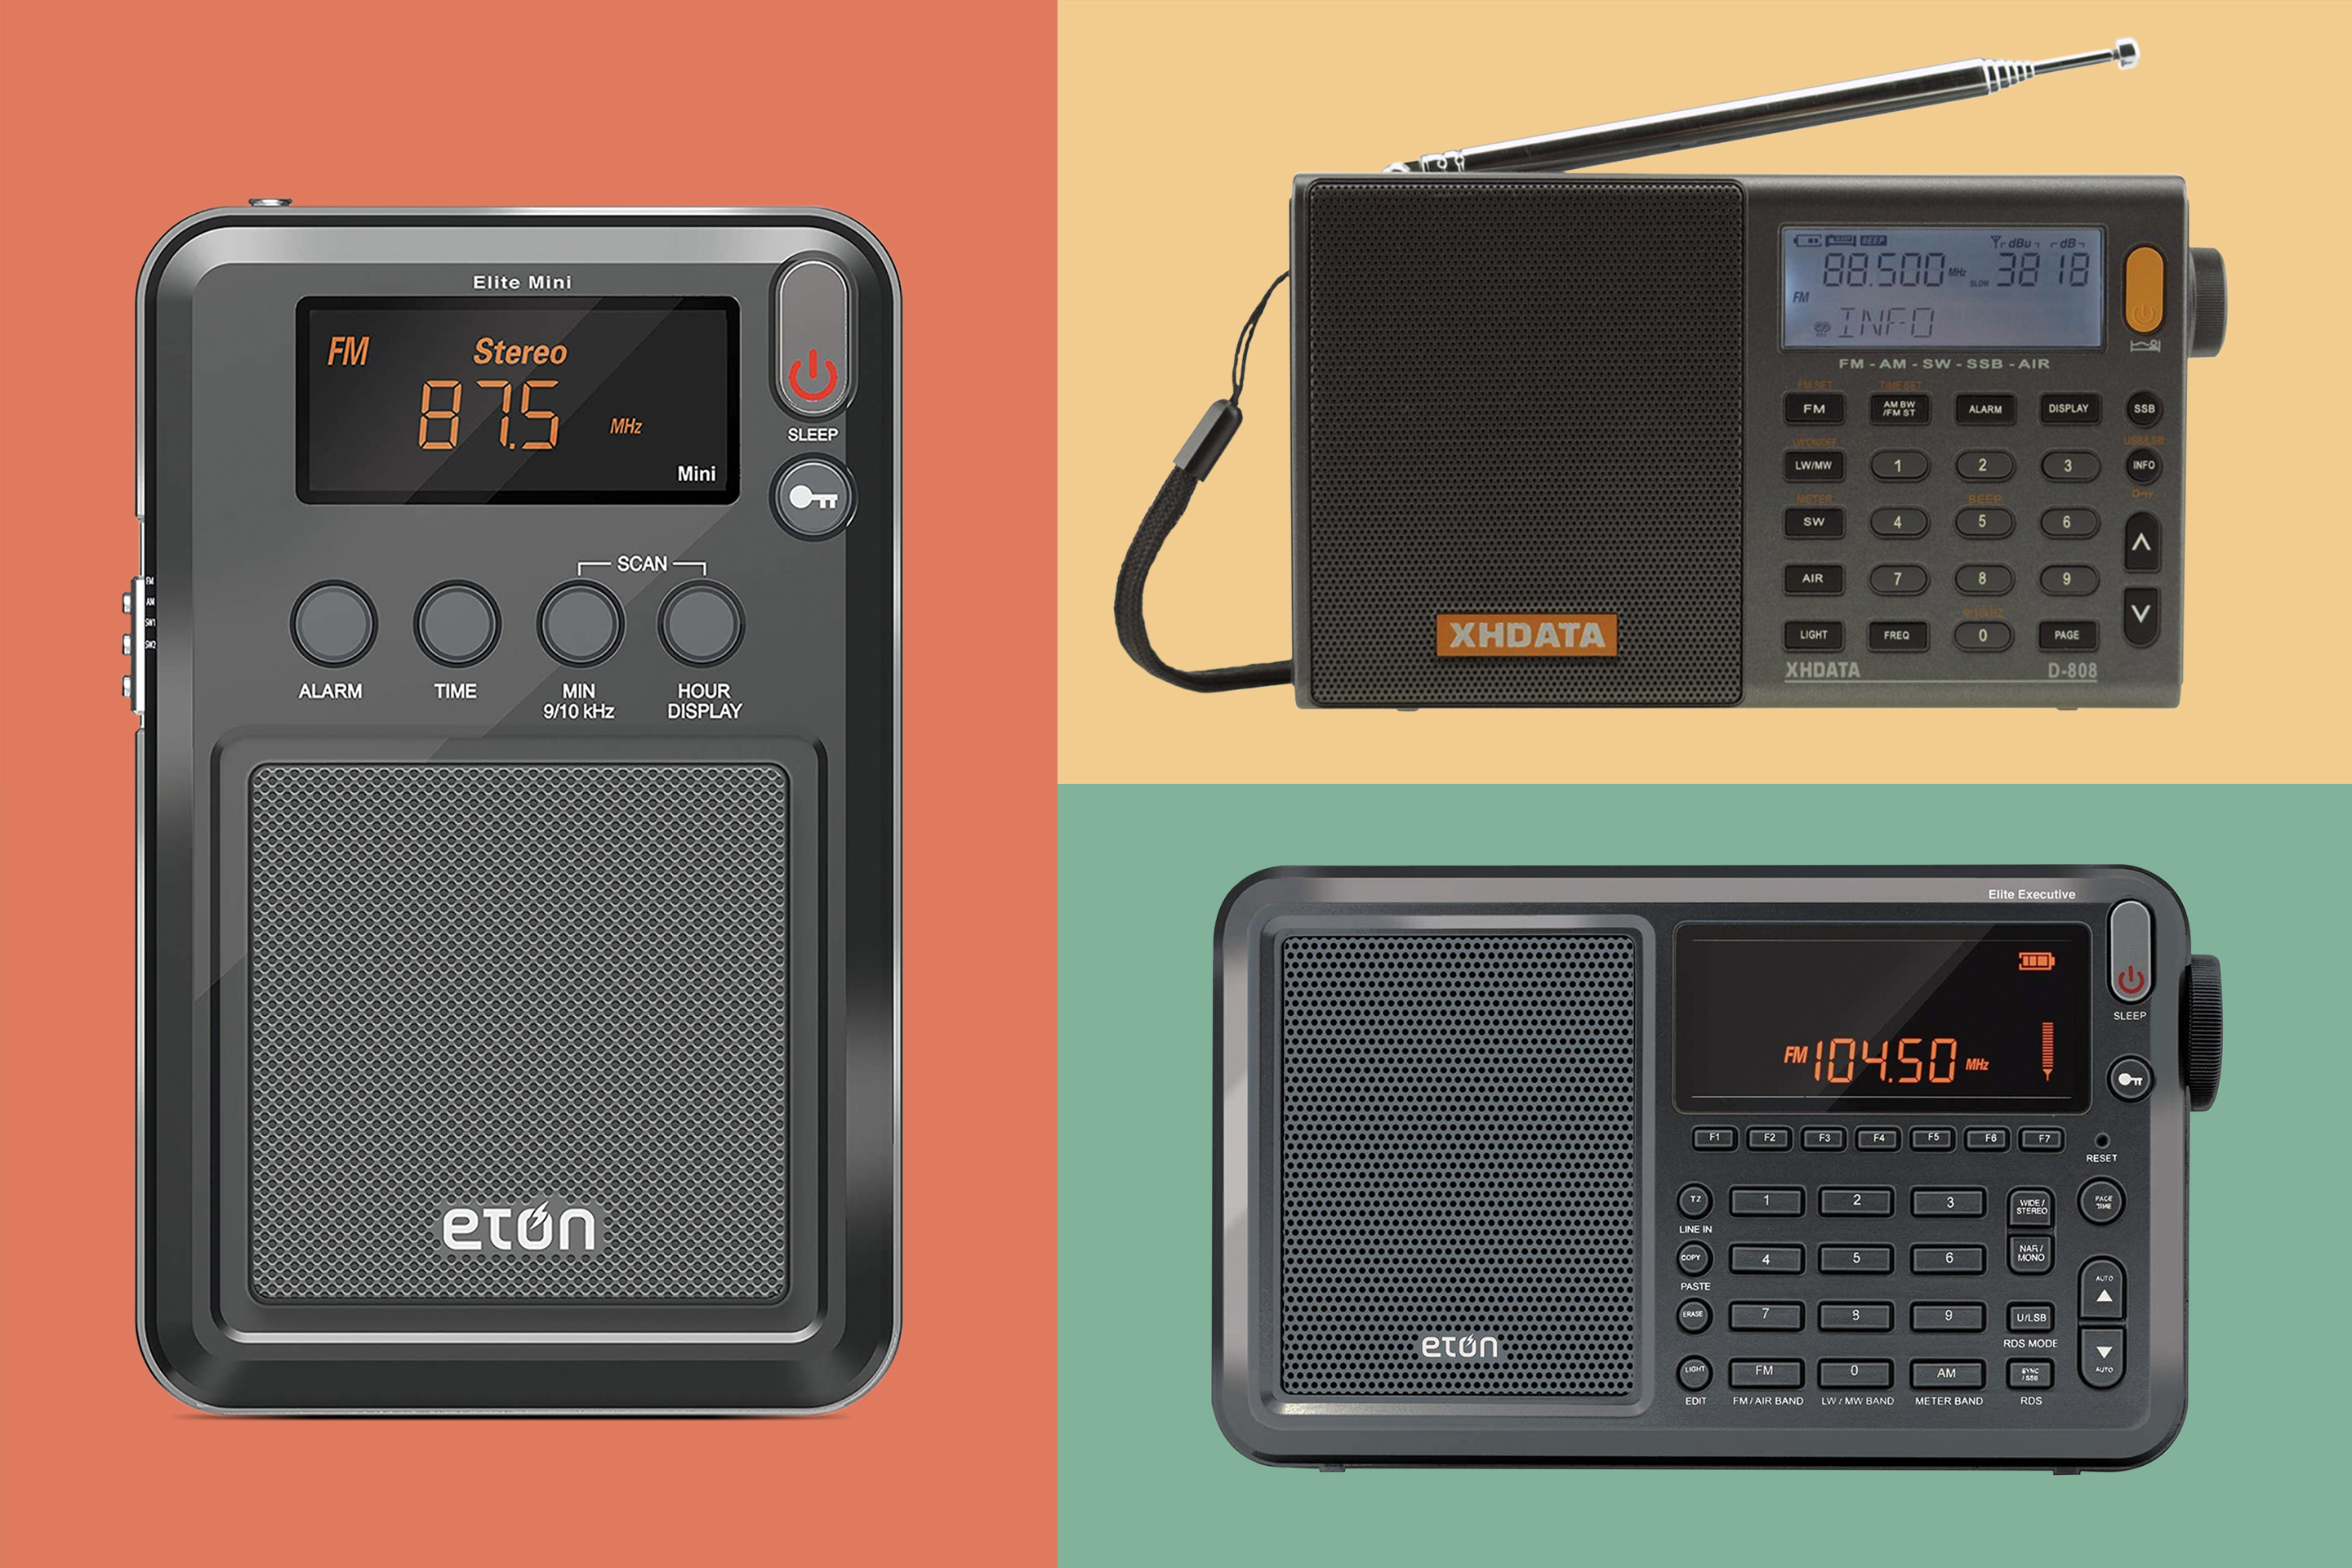 The Best Shortwave Radios for Your Money